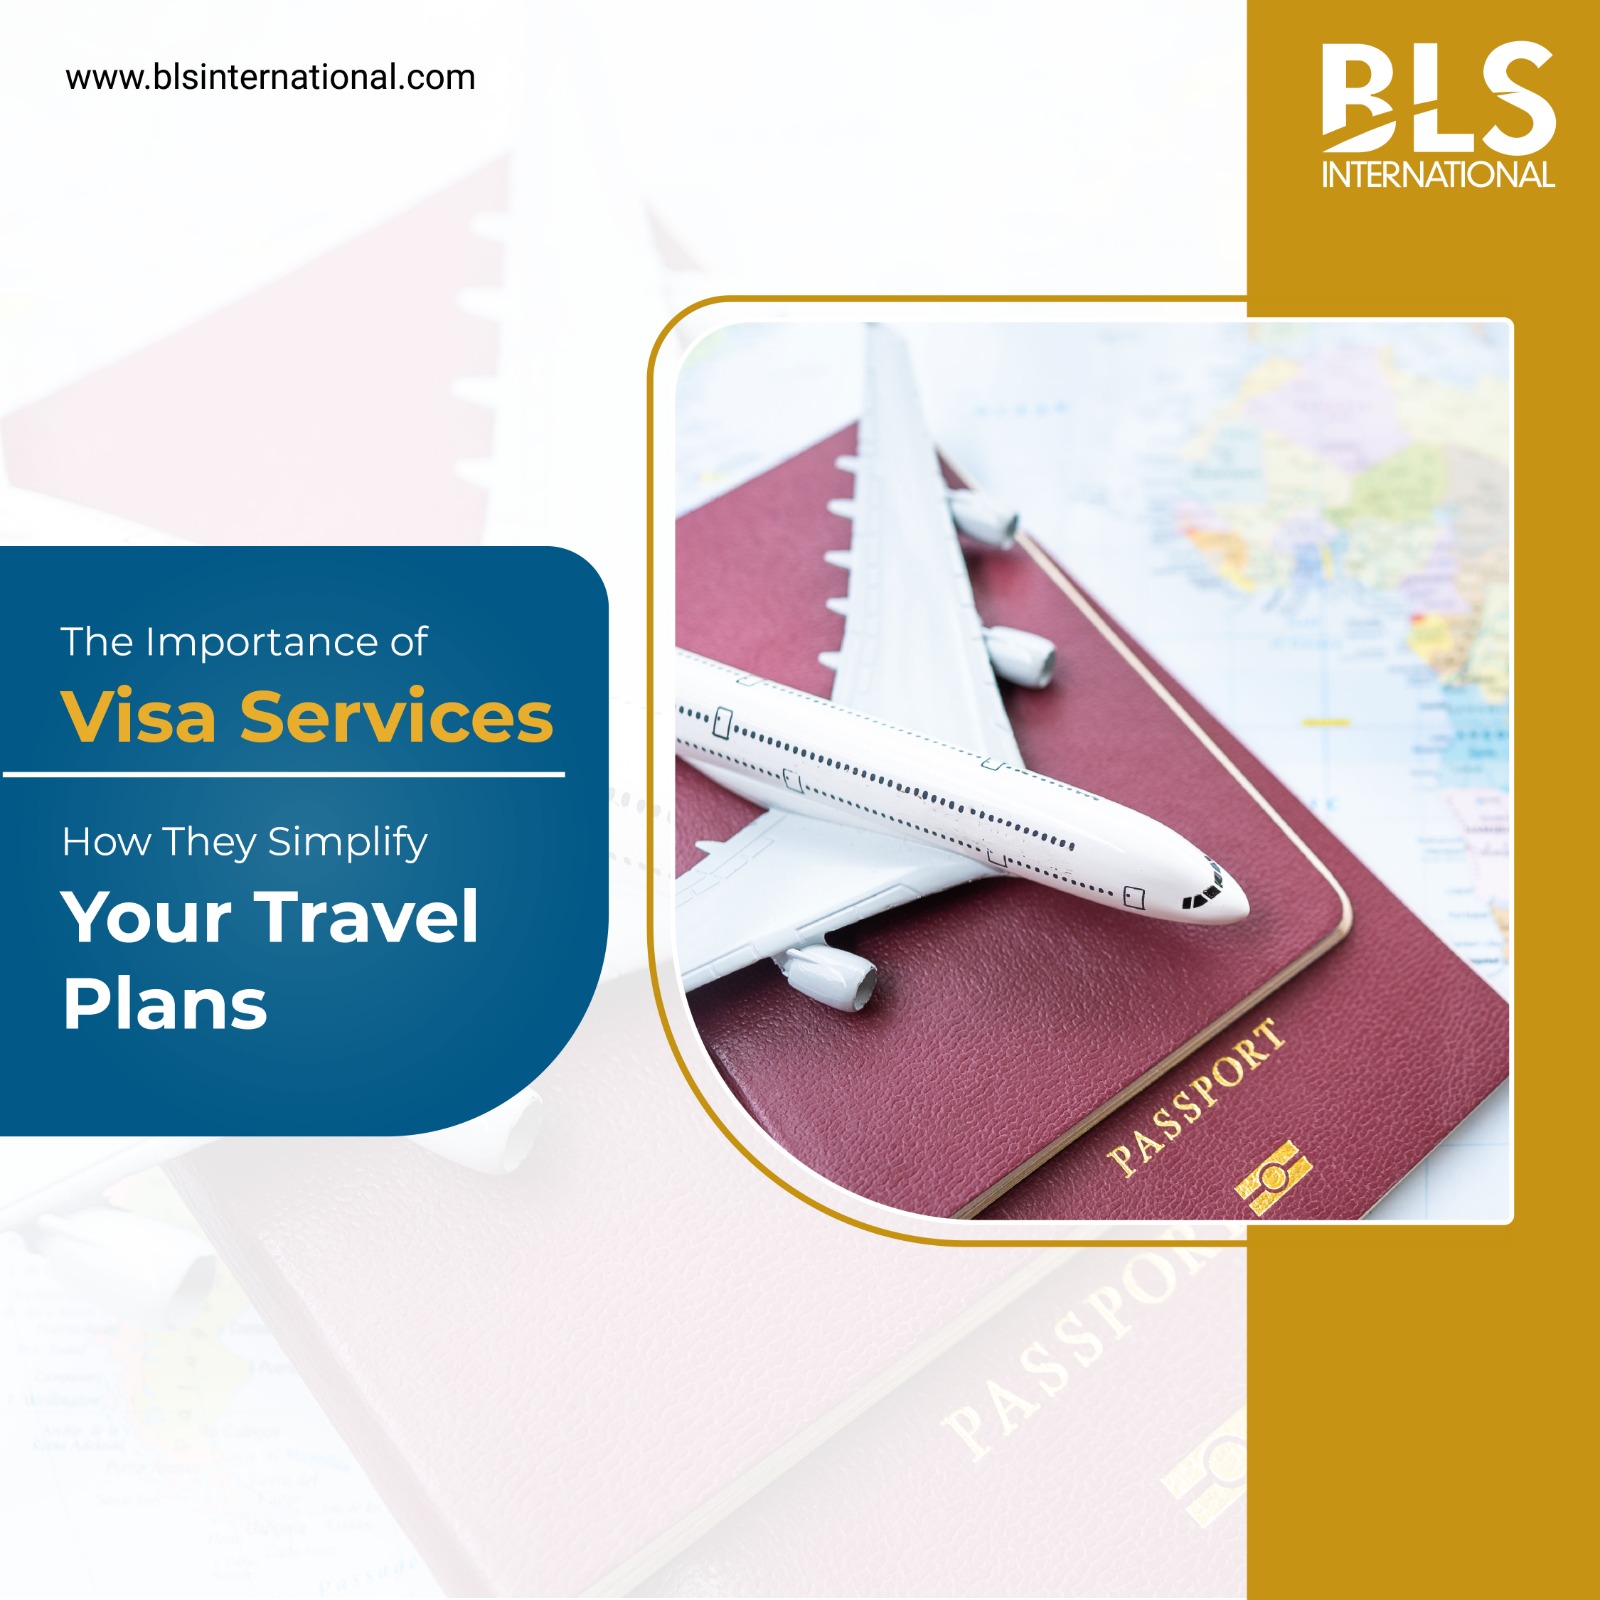 The Importance of Visa Services: How They Simplify Your Travel Plans